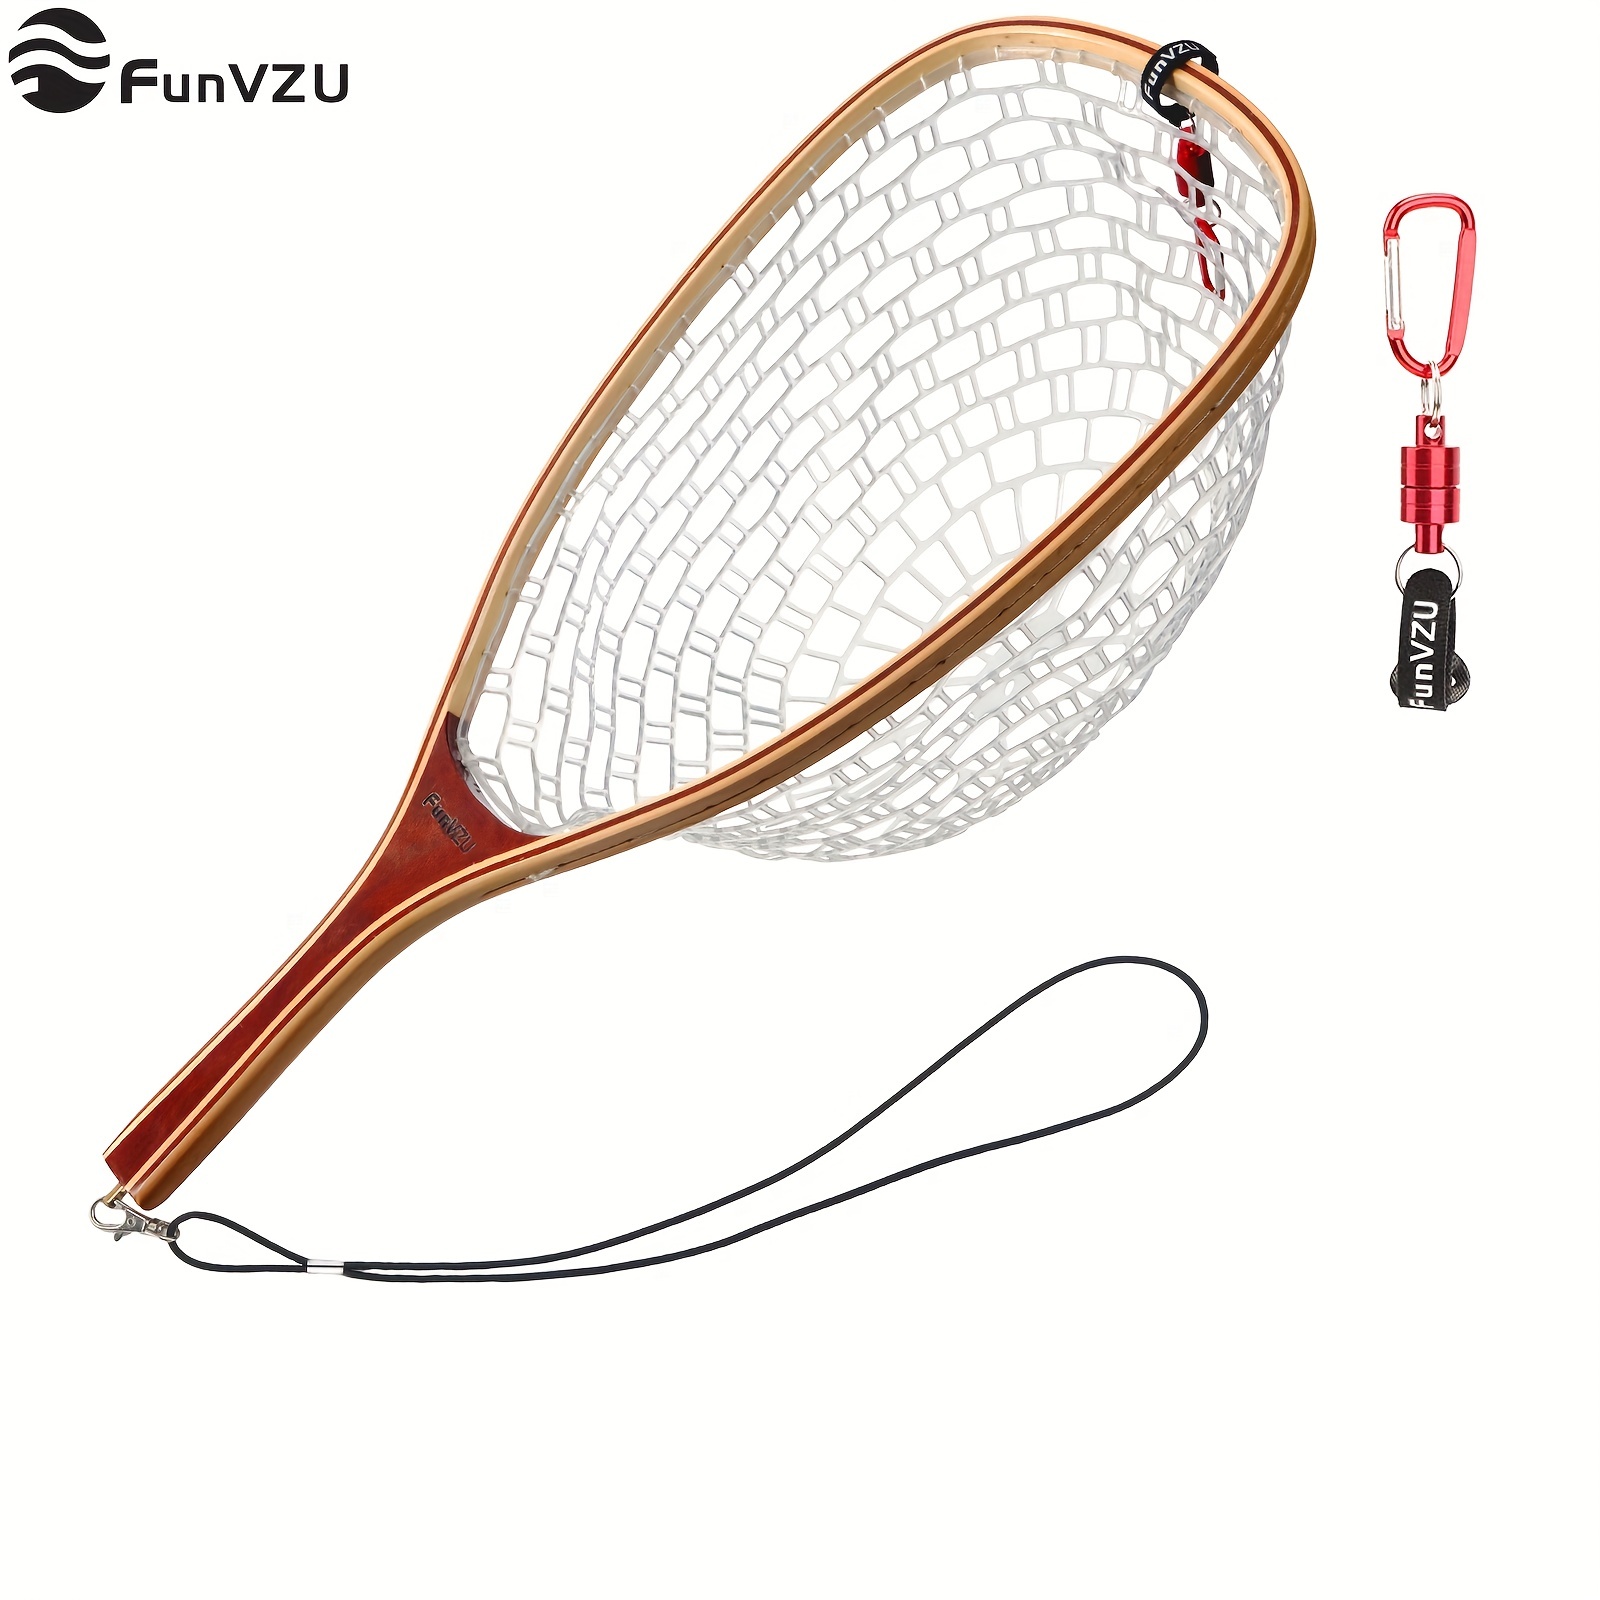 FunVZU Fly Fishing Trout Net - Magnetic Release, Soft Rubber Mesh, Wood  Handle, Safety Cord and Copper Swivel